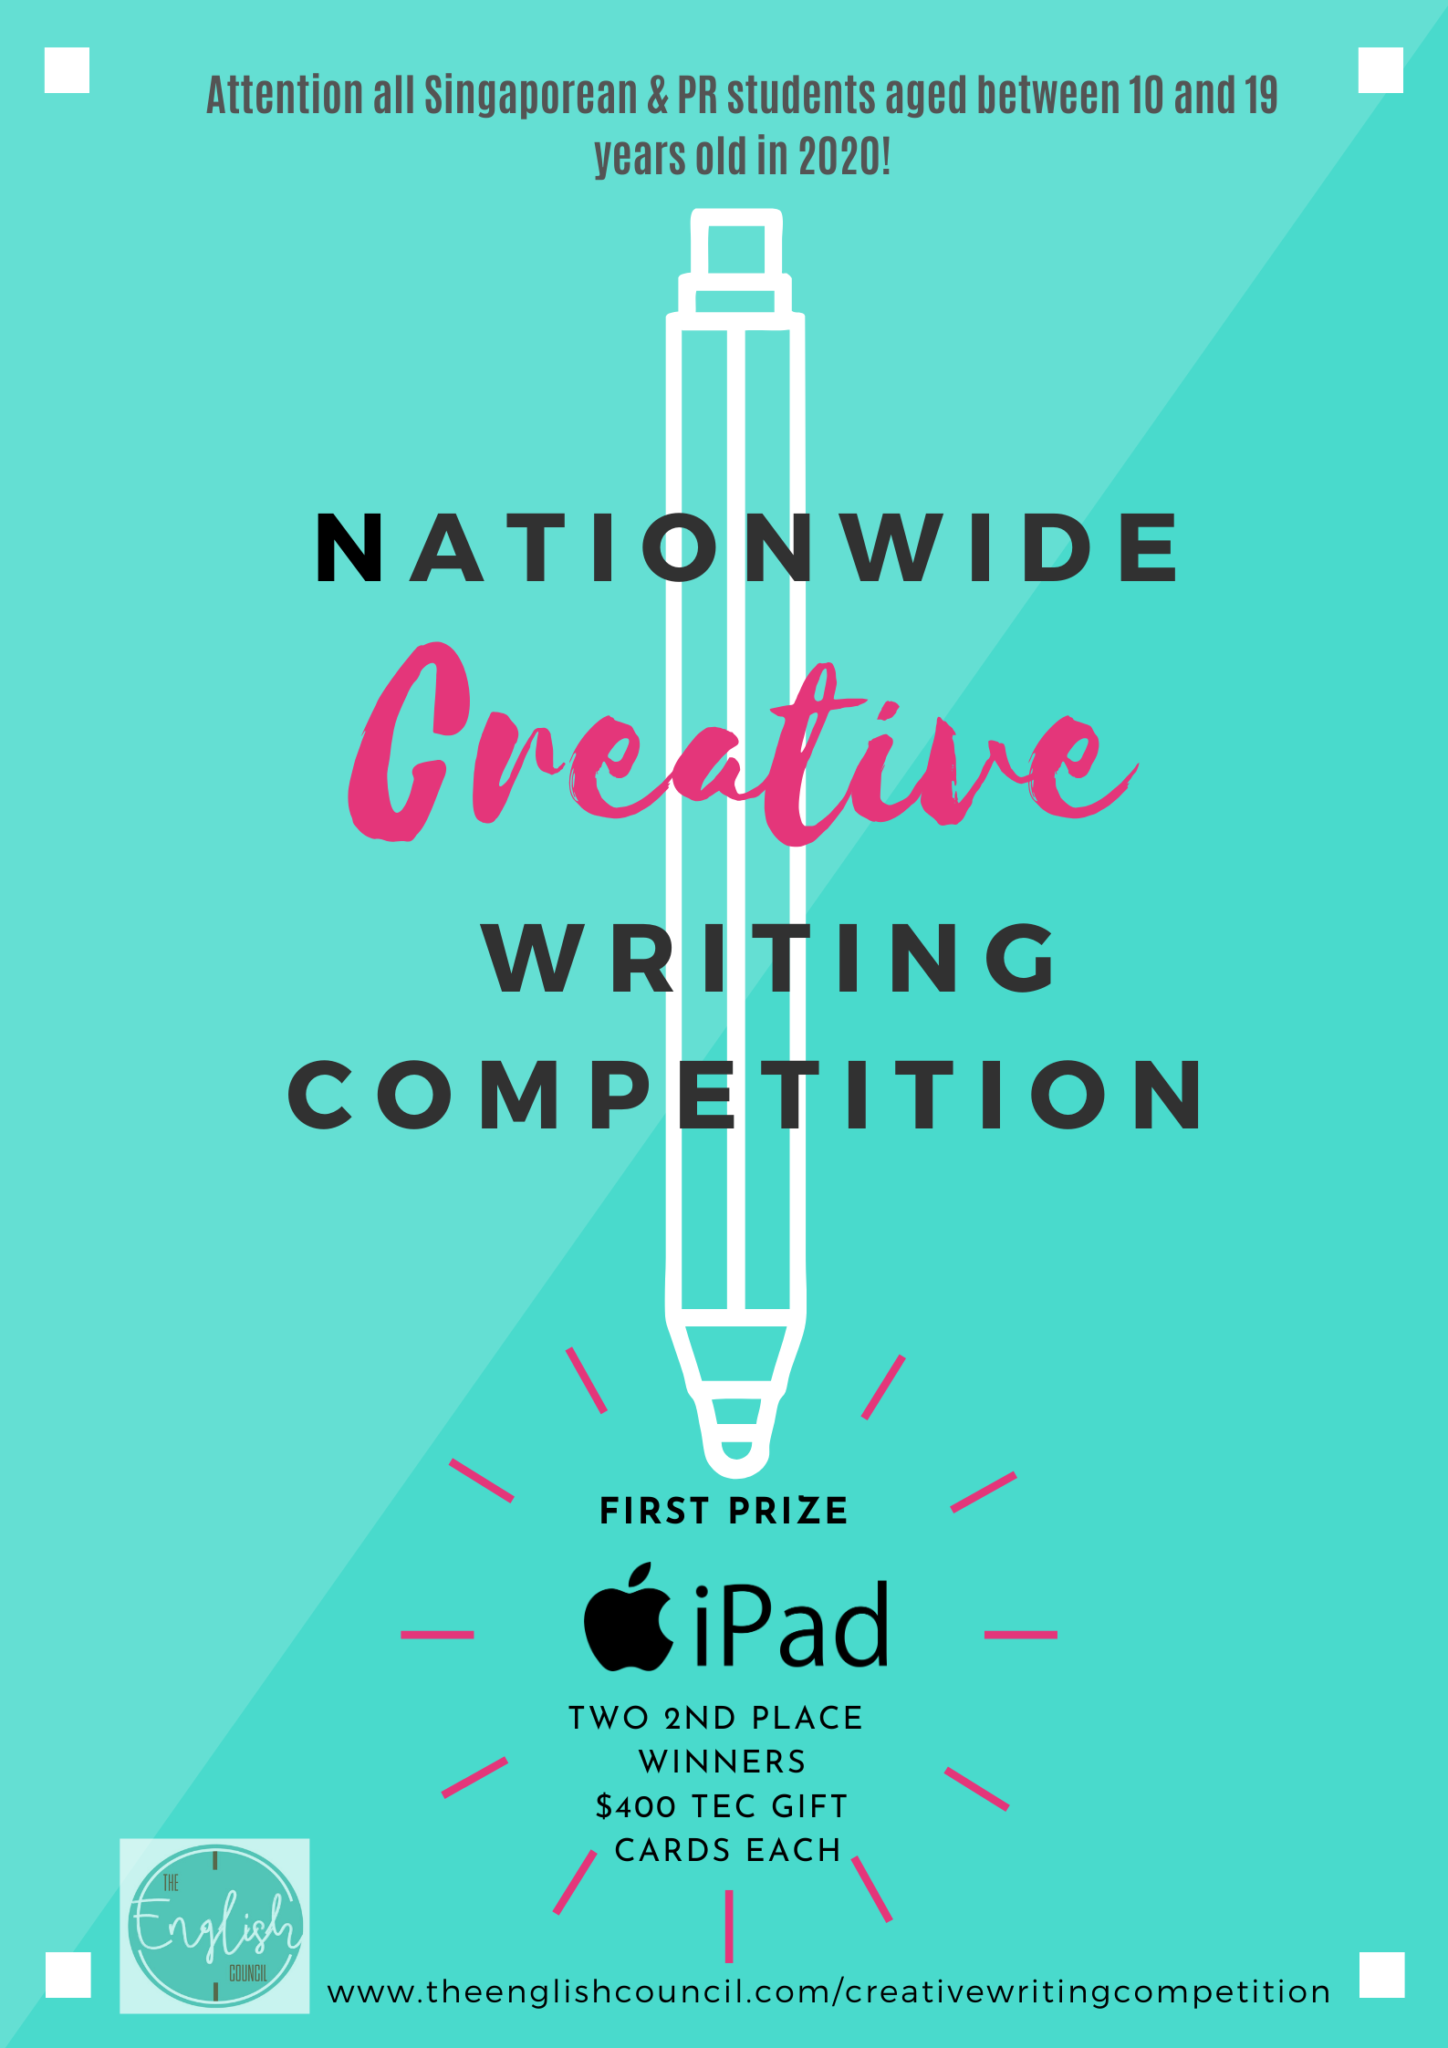 Creative Writing Competition » The English Council Pte. Ltd.